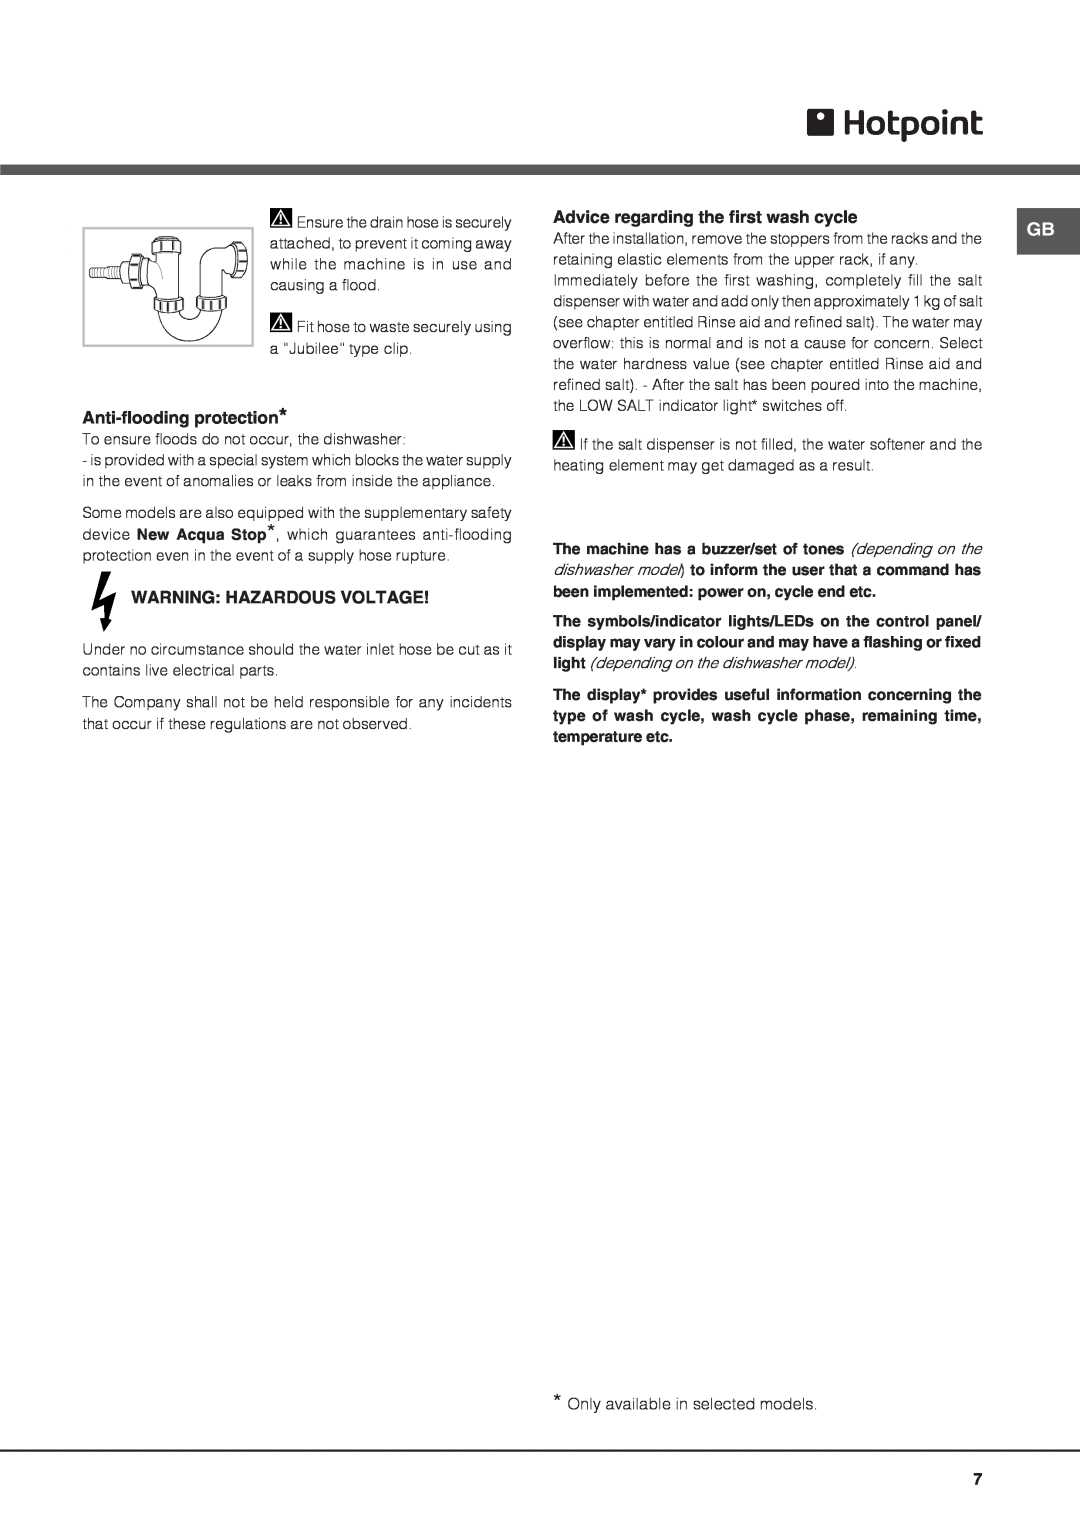 Hotpoint FDYF 11011 Style manual Anti-floodingprotection, Warning Hazardous Voltage, Advice regarding the first wash cycle 